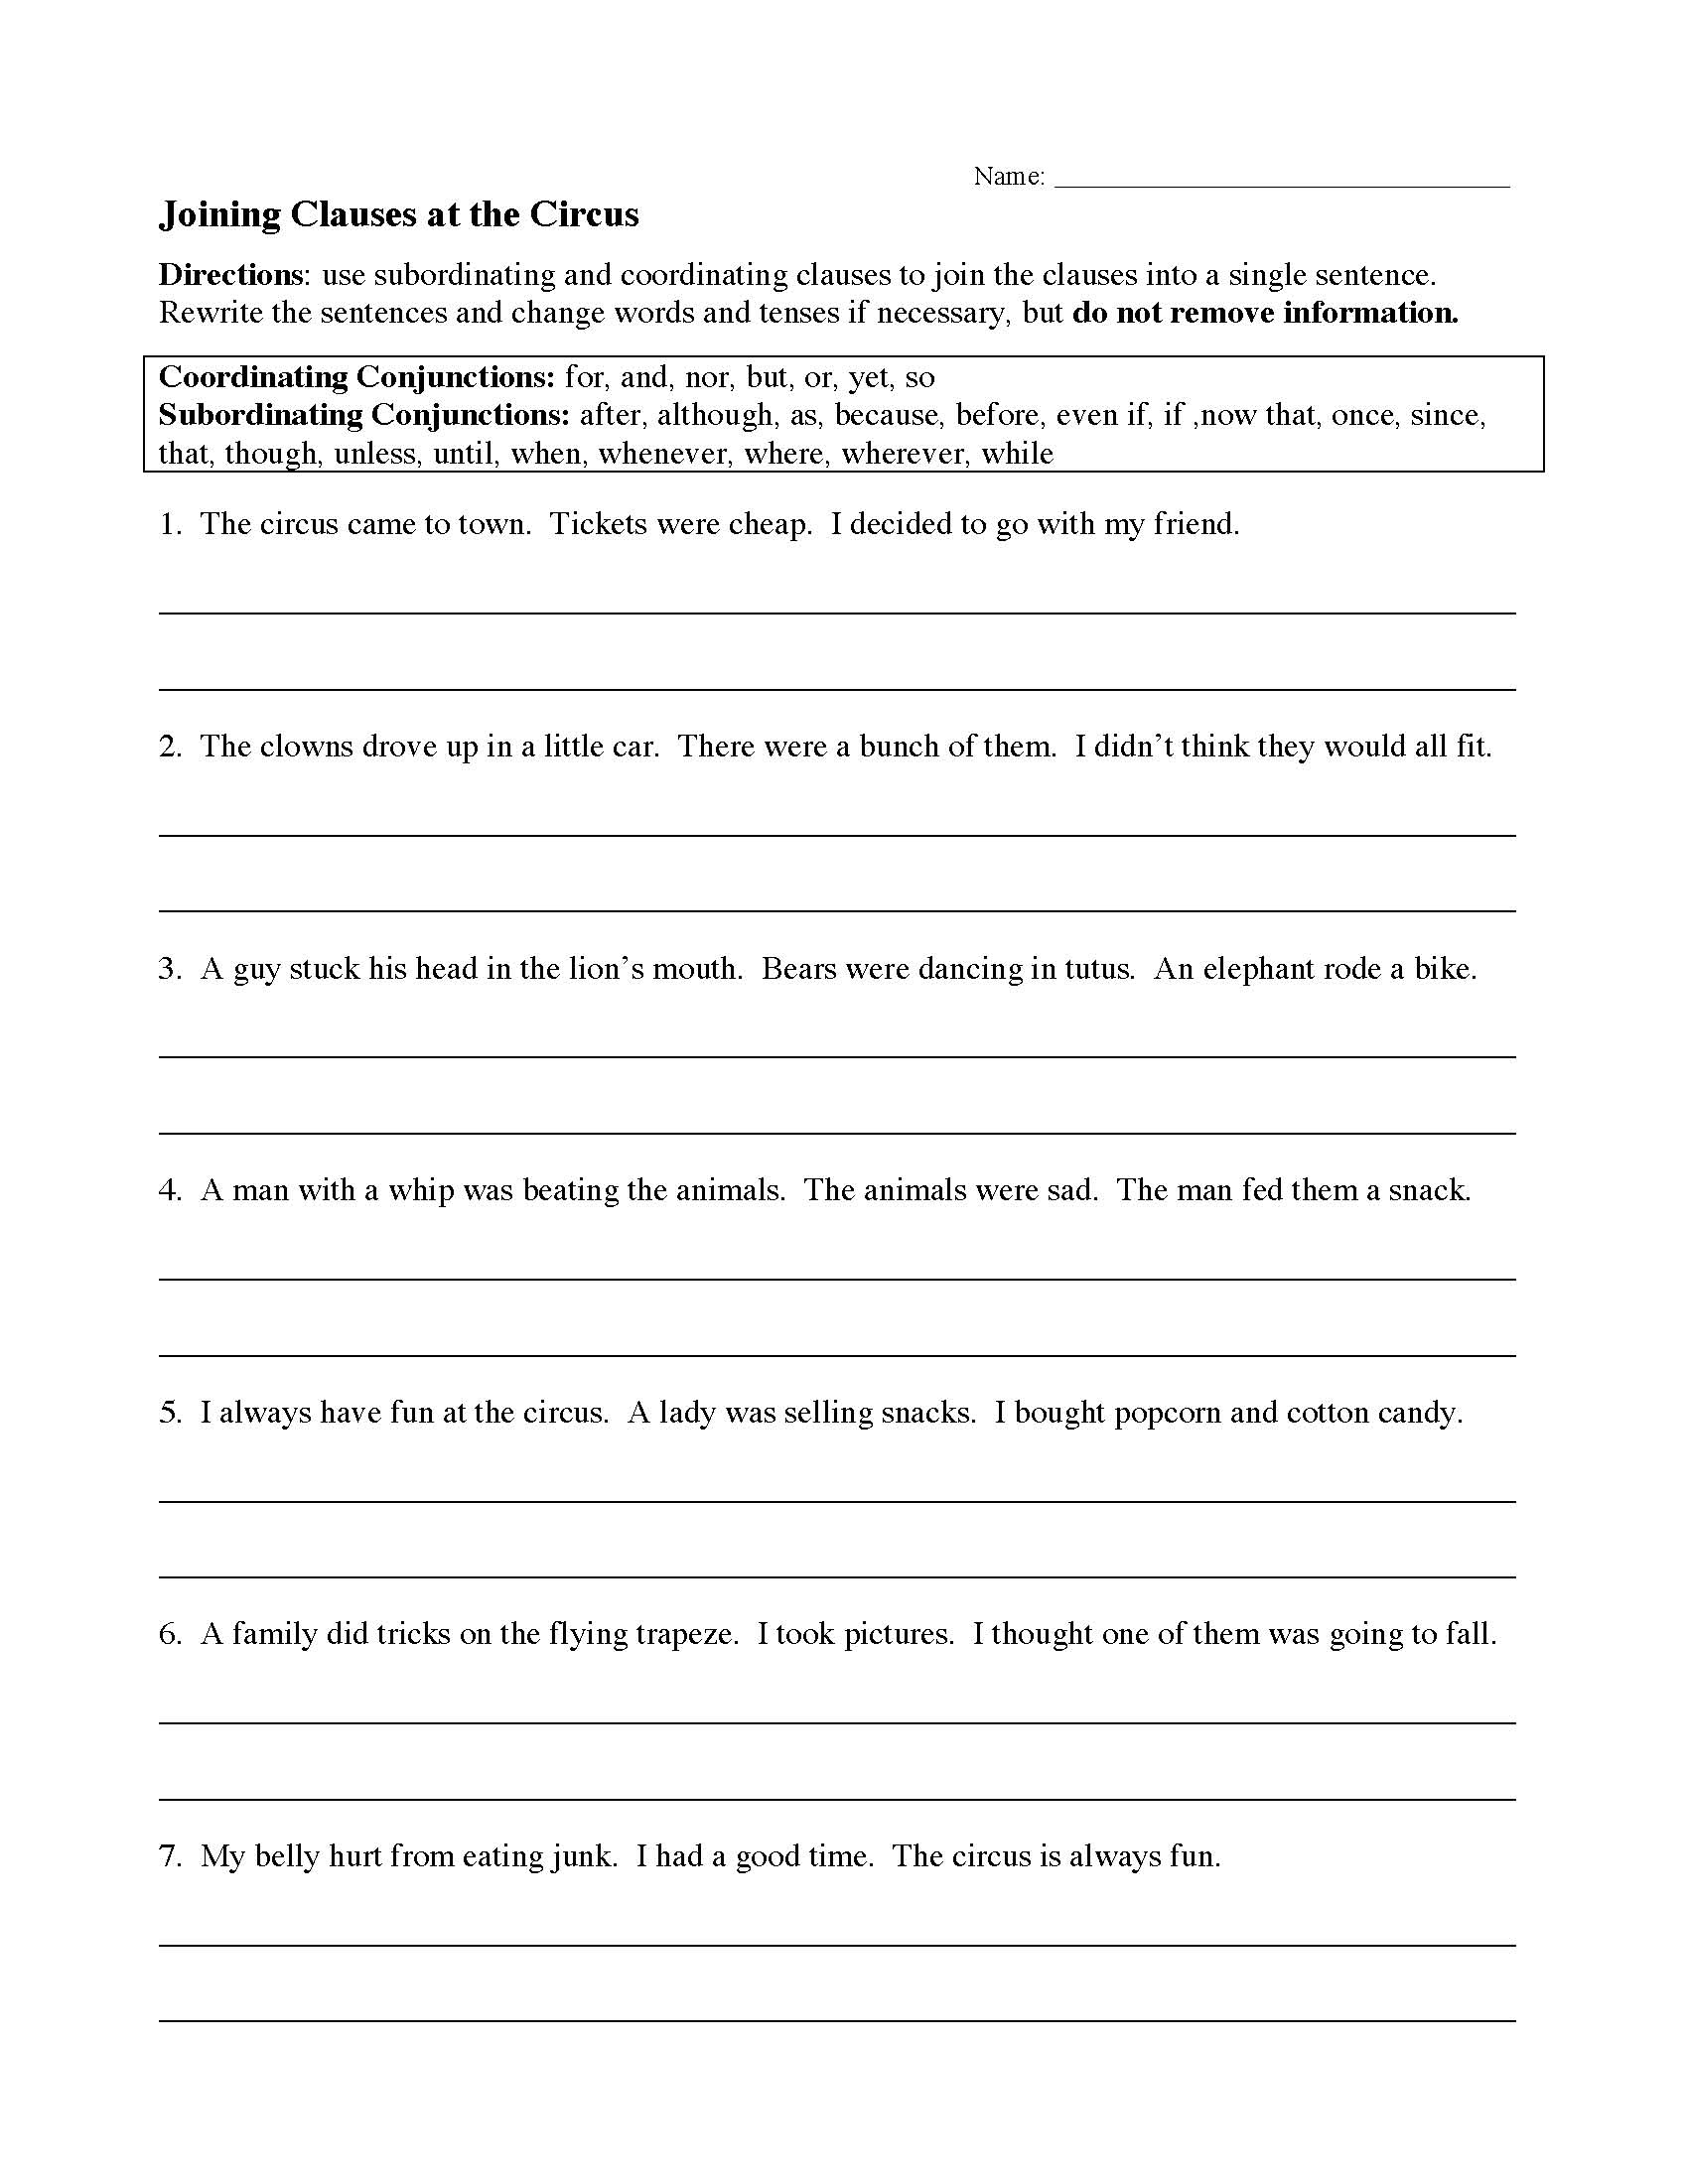 This is a preview image of Joining Clauses at the Circus Worksheet. Click on it to enlarge it or view the source file.